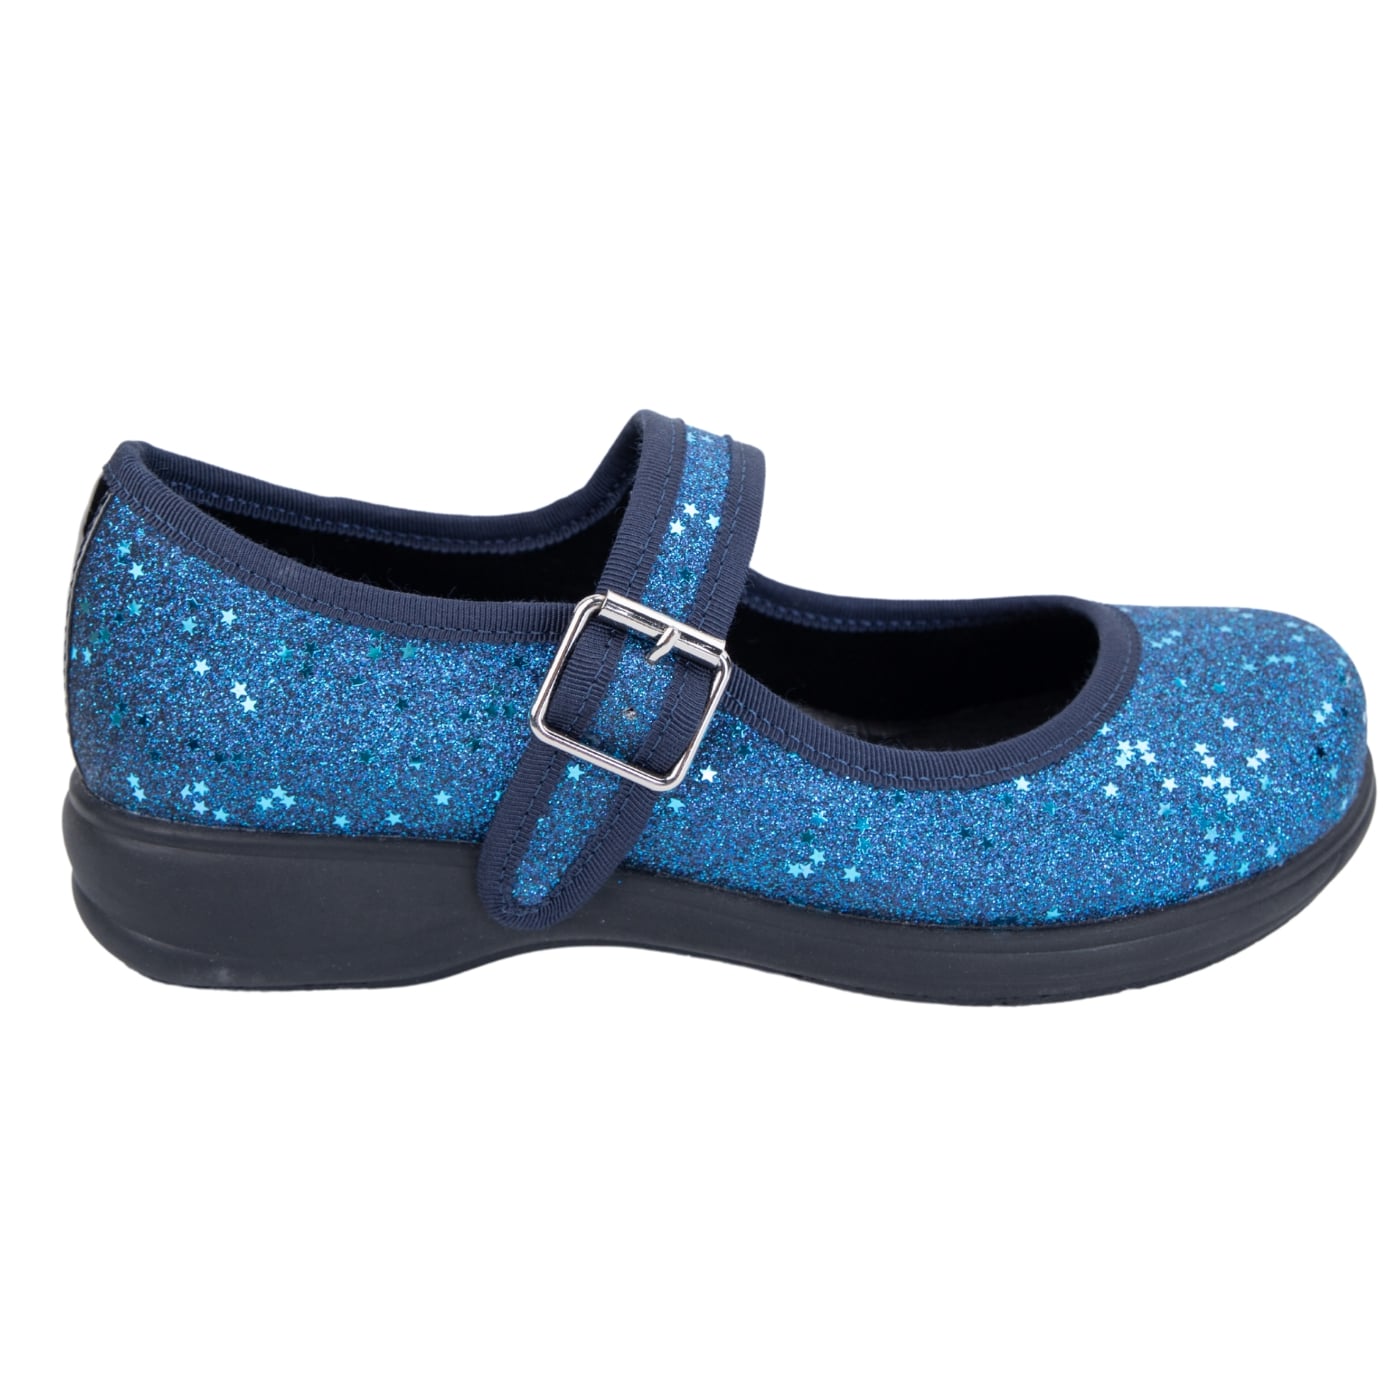 Sapphire Mary Janes by RainbowsAndFairies.com (Blue Glitter - Stars - Sparkle Shoes - Mary Janes - Buckle Up Shoes - Mismatched Shoes) - SKU: FW_MARYJ_SAPPH_ORG - Pic 03